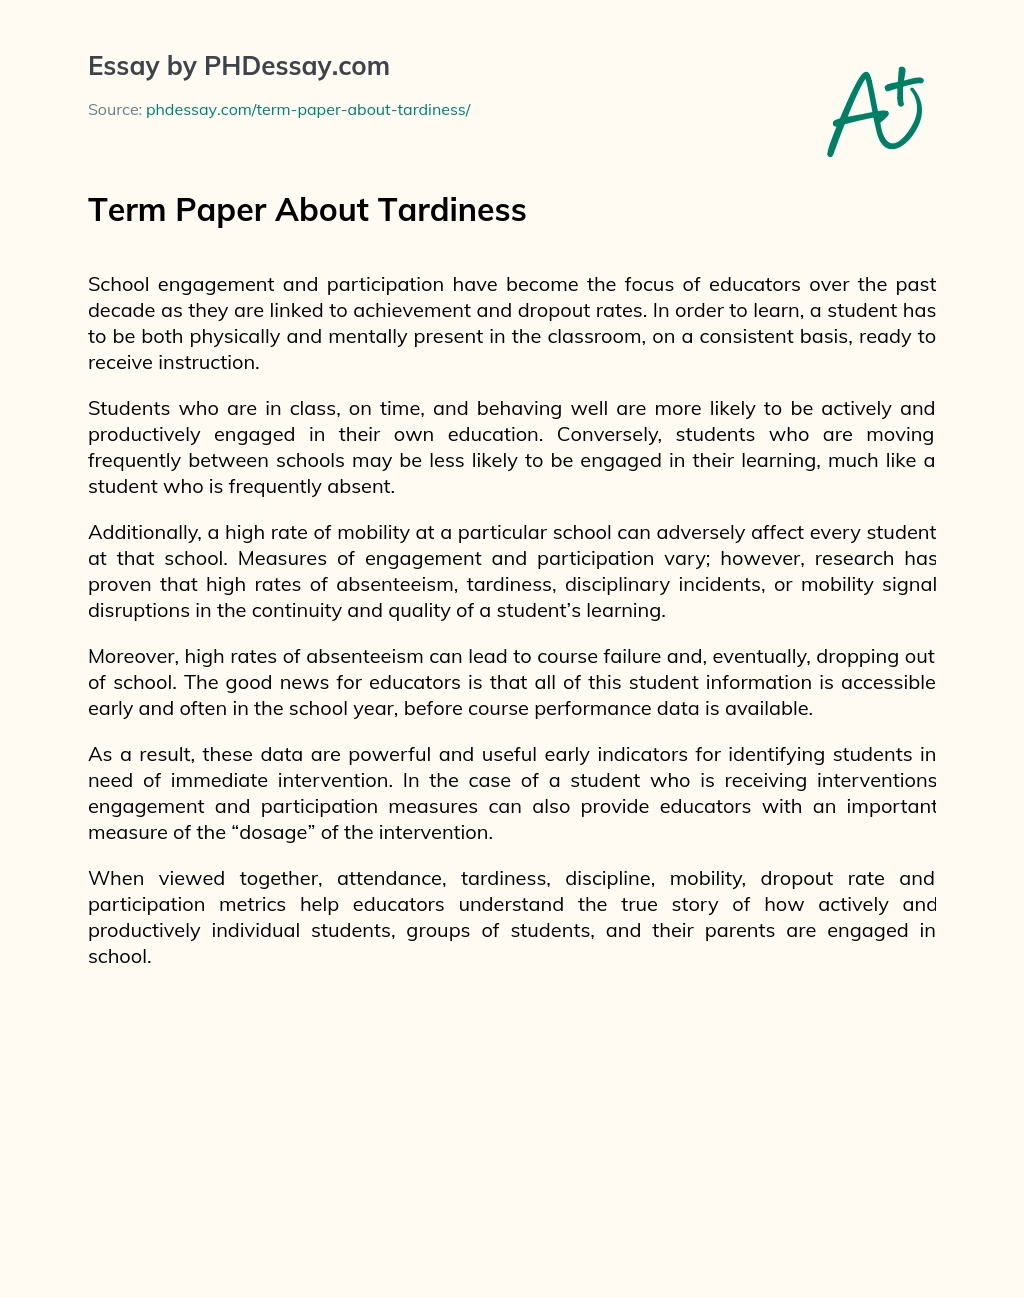 Term Paper About Tardiness essay